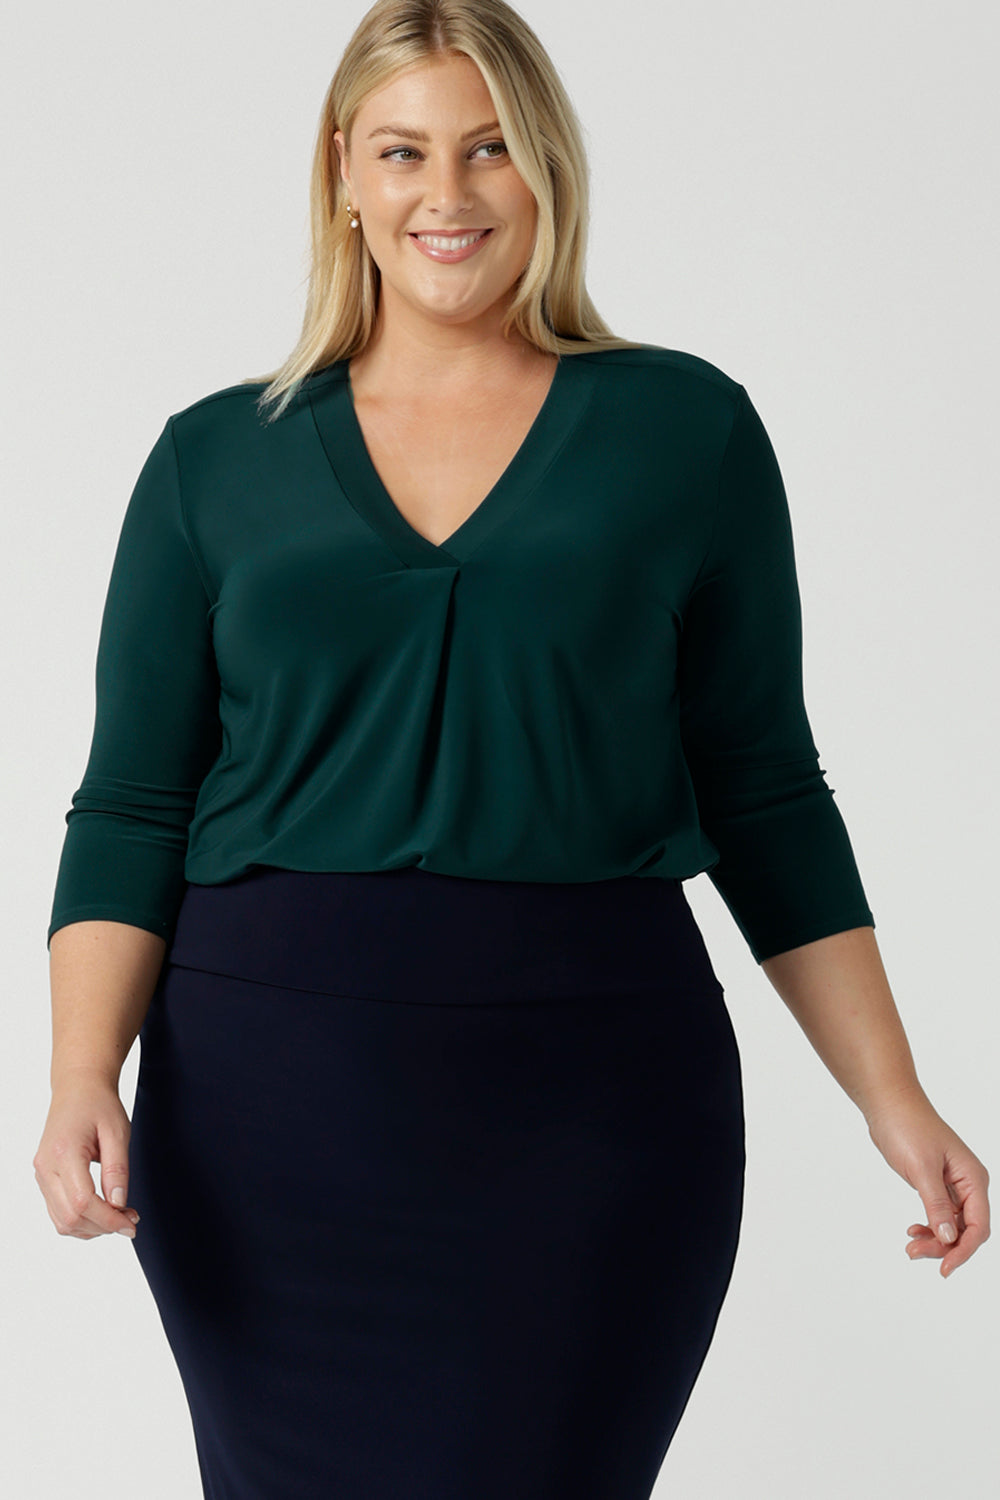 A size 18 woman wears the Jaime Top in Alpine with a soft pleated neckline and 3/4 sleeves. A fitted Andi skirt in Navy. Easy care jersey that is perfect for work to weekend. Made in Australia for  women size 8 - 24. 